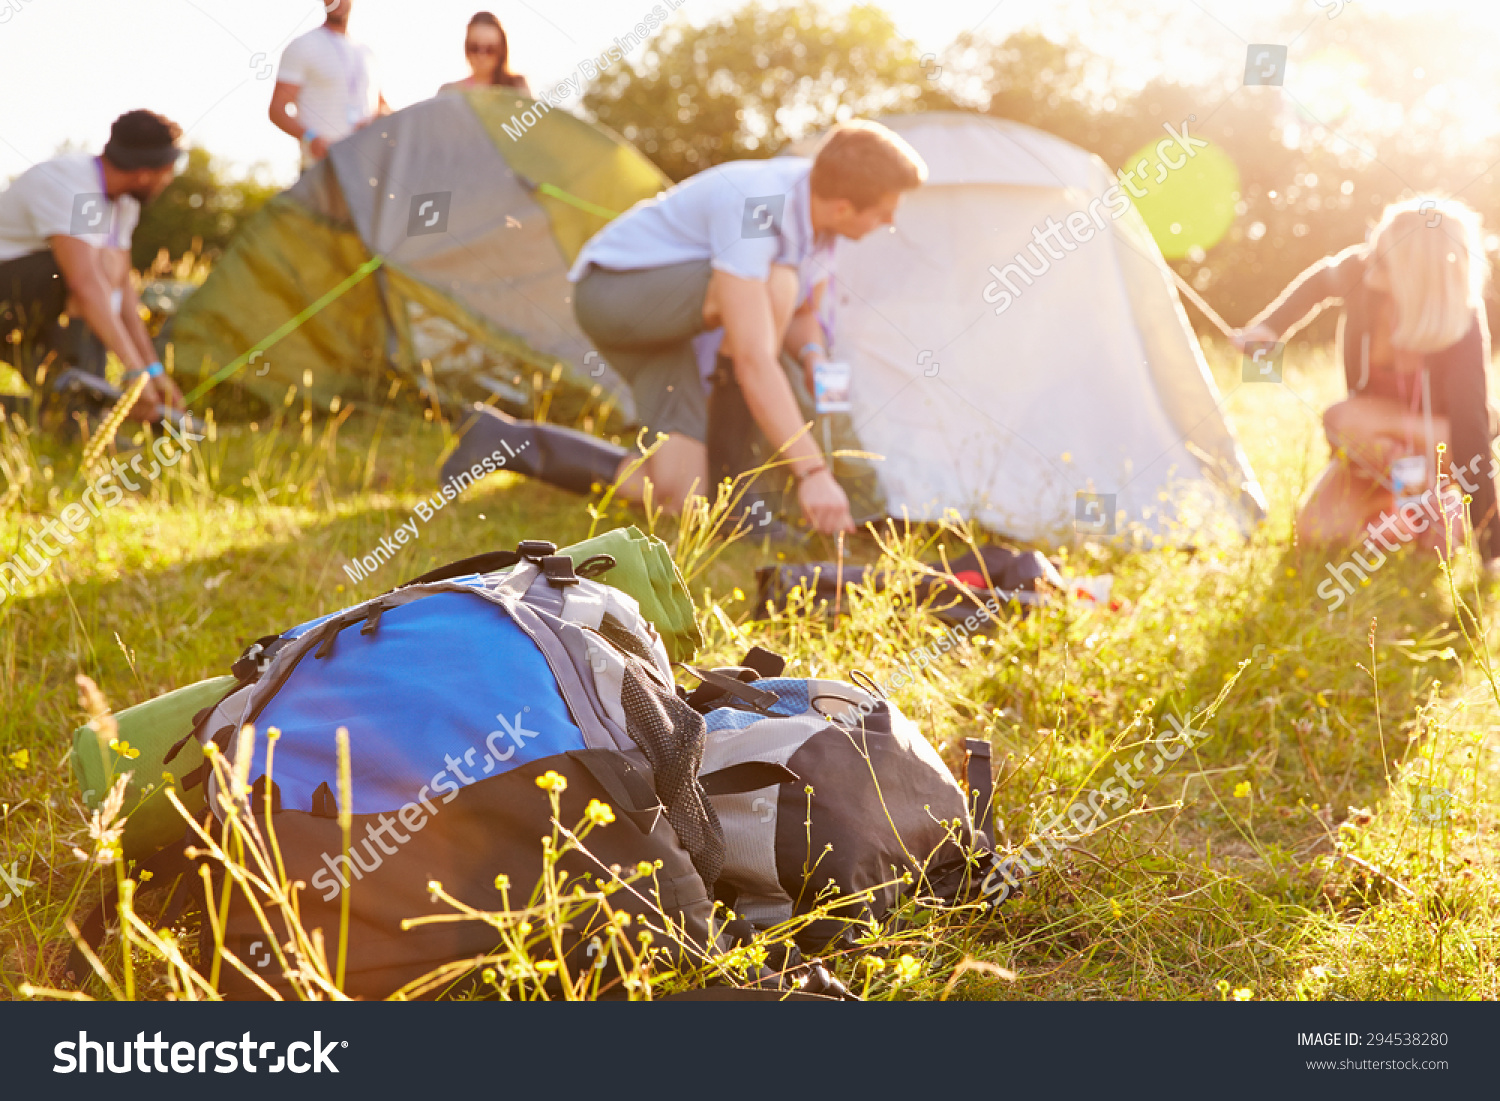 Group Of Young Friends Pitching Tents On Camping Holiday #294538280